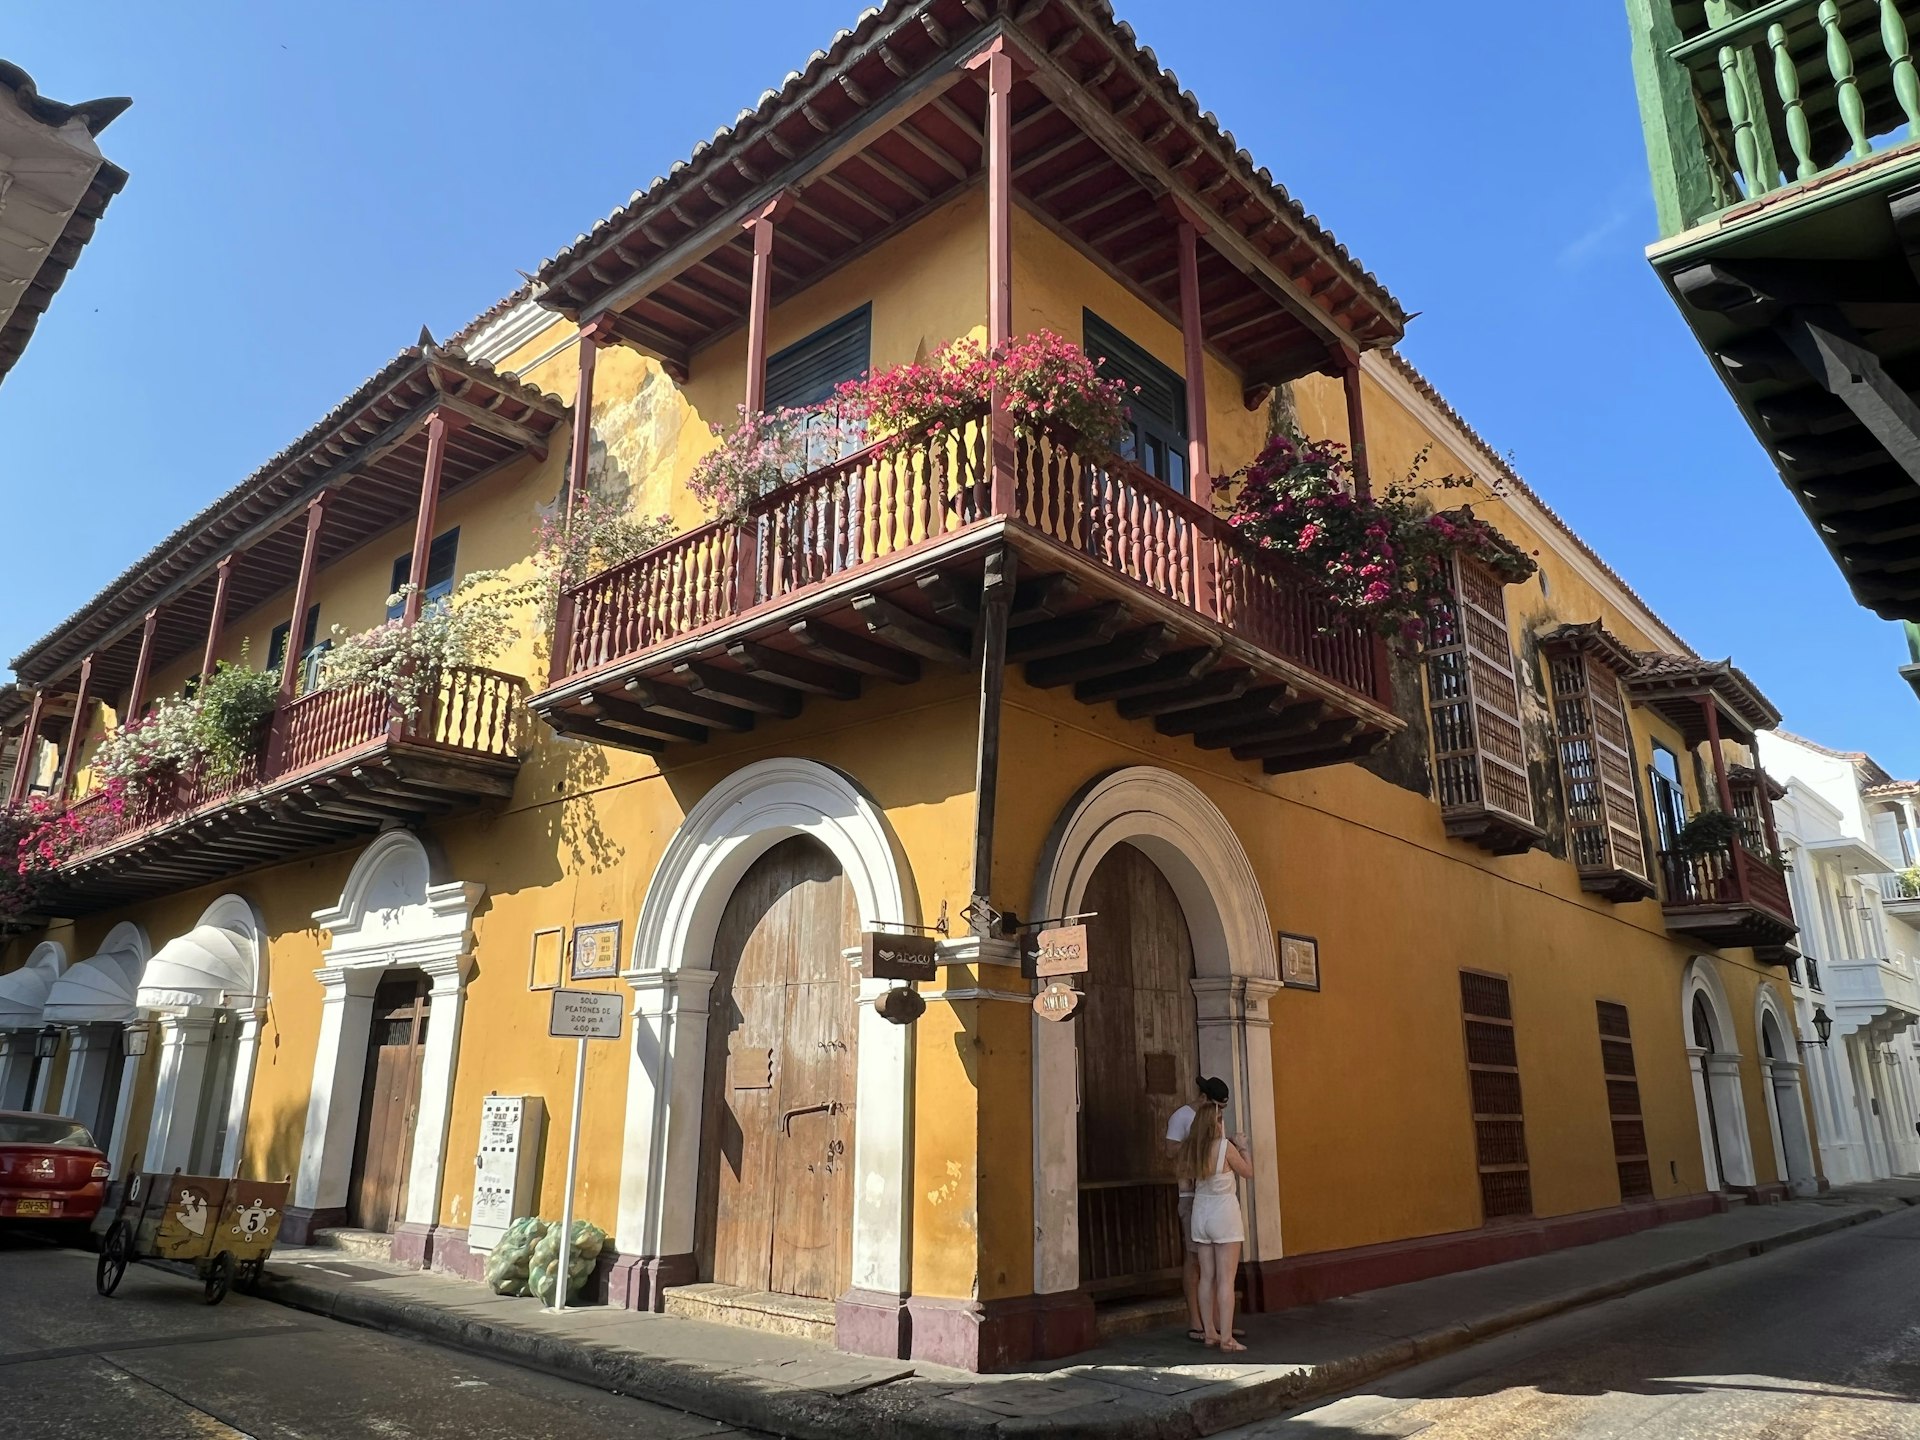 Strolling the streets of Cartagena